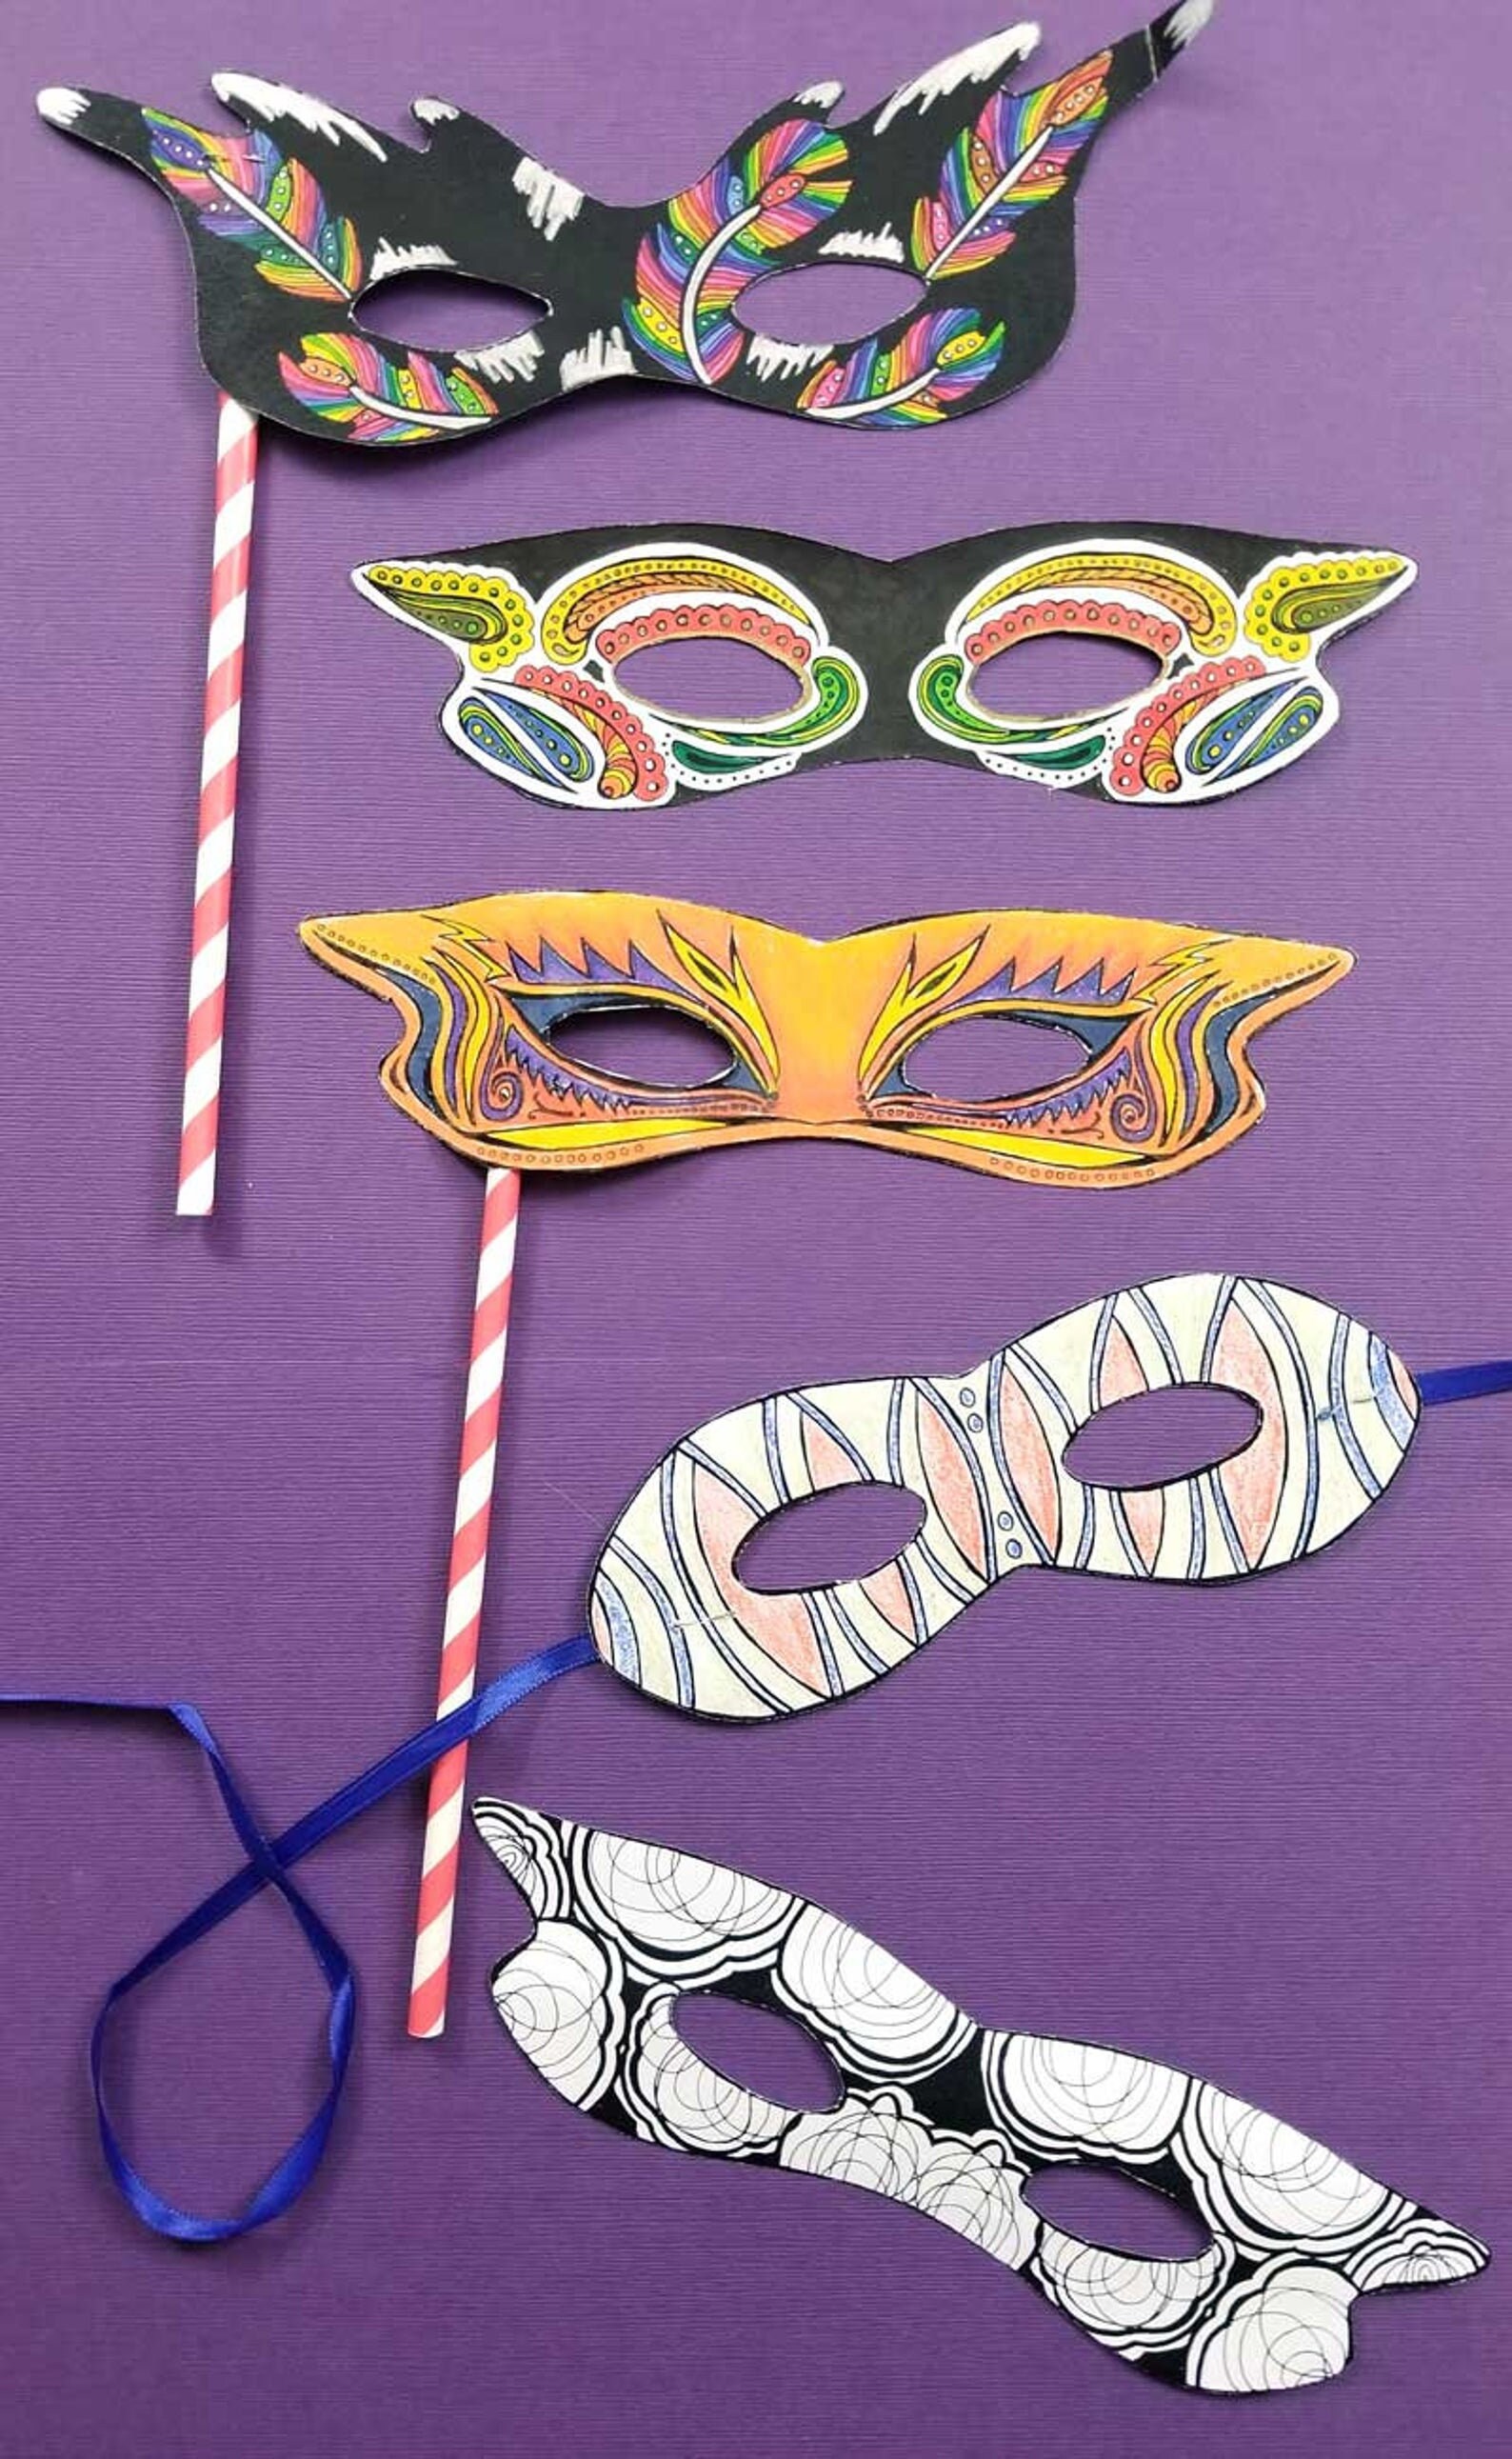 Purim Coloring Crafts Bundle Purim Masks Graggers and Puppets Paper Craft  Templates Printable Activities for Kids 